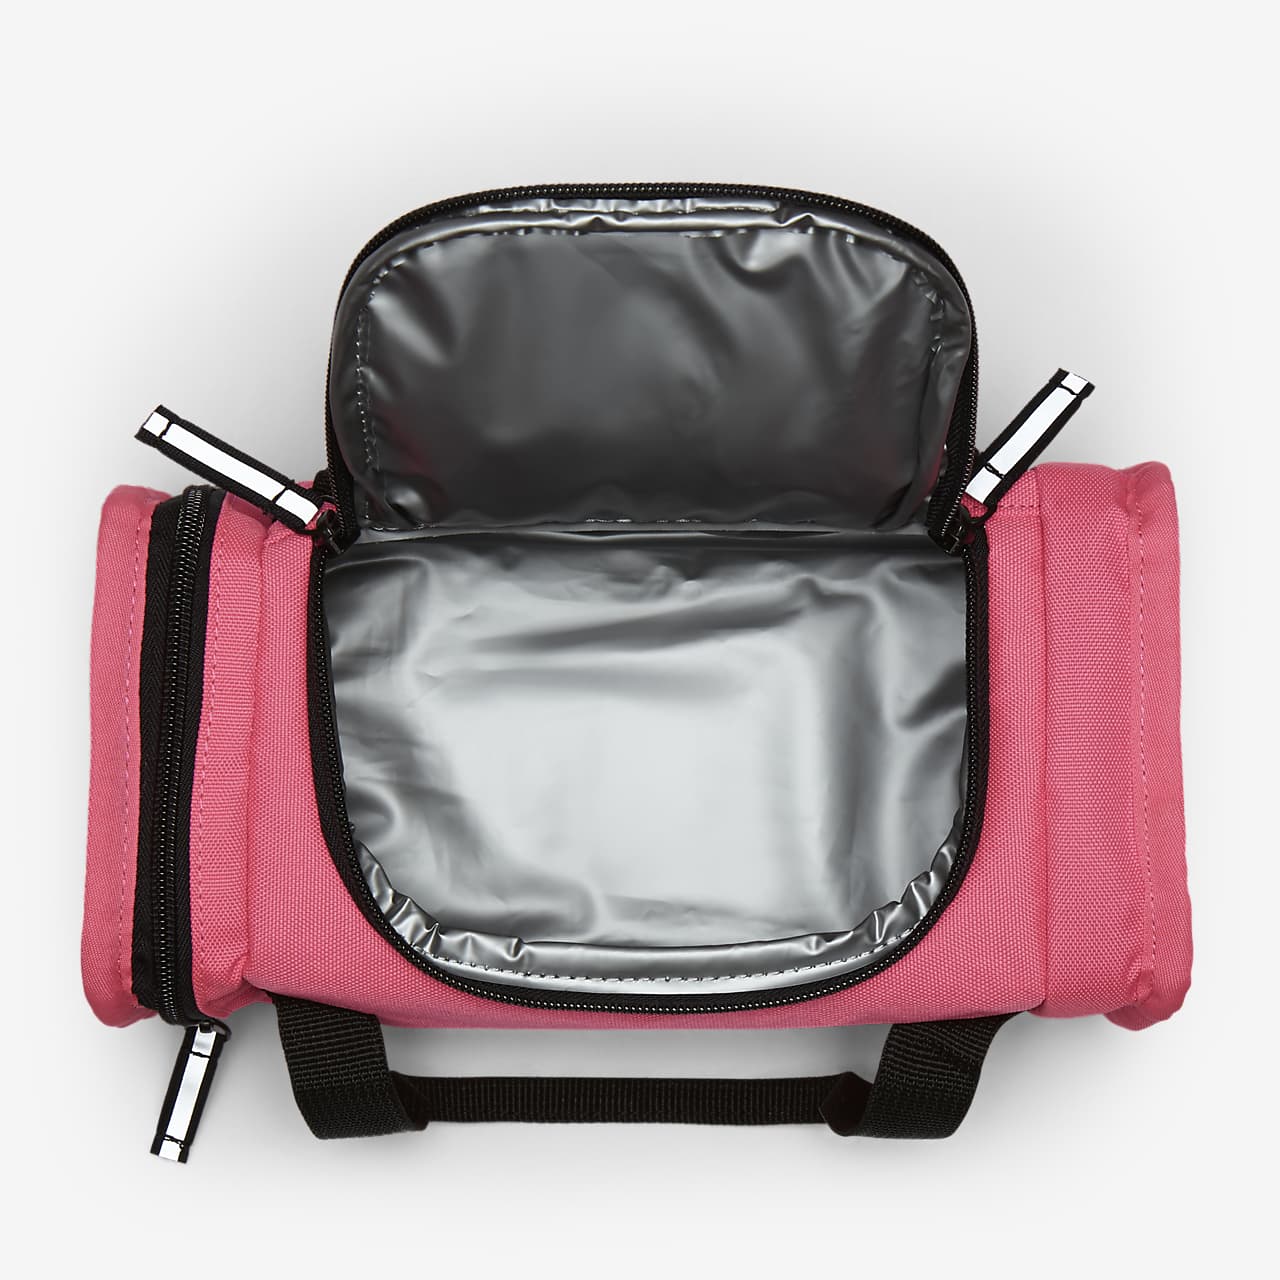 Nike Small Duffel Lunch Tote